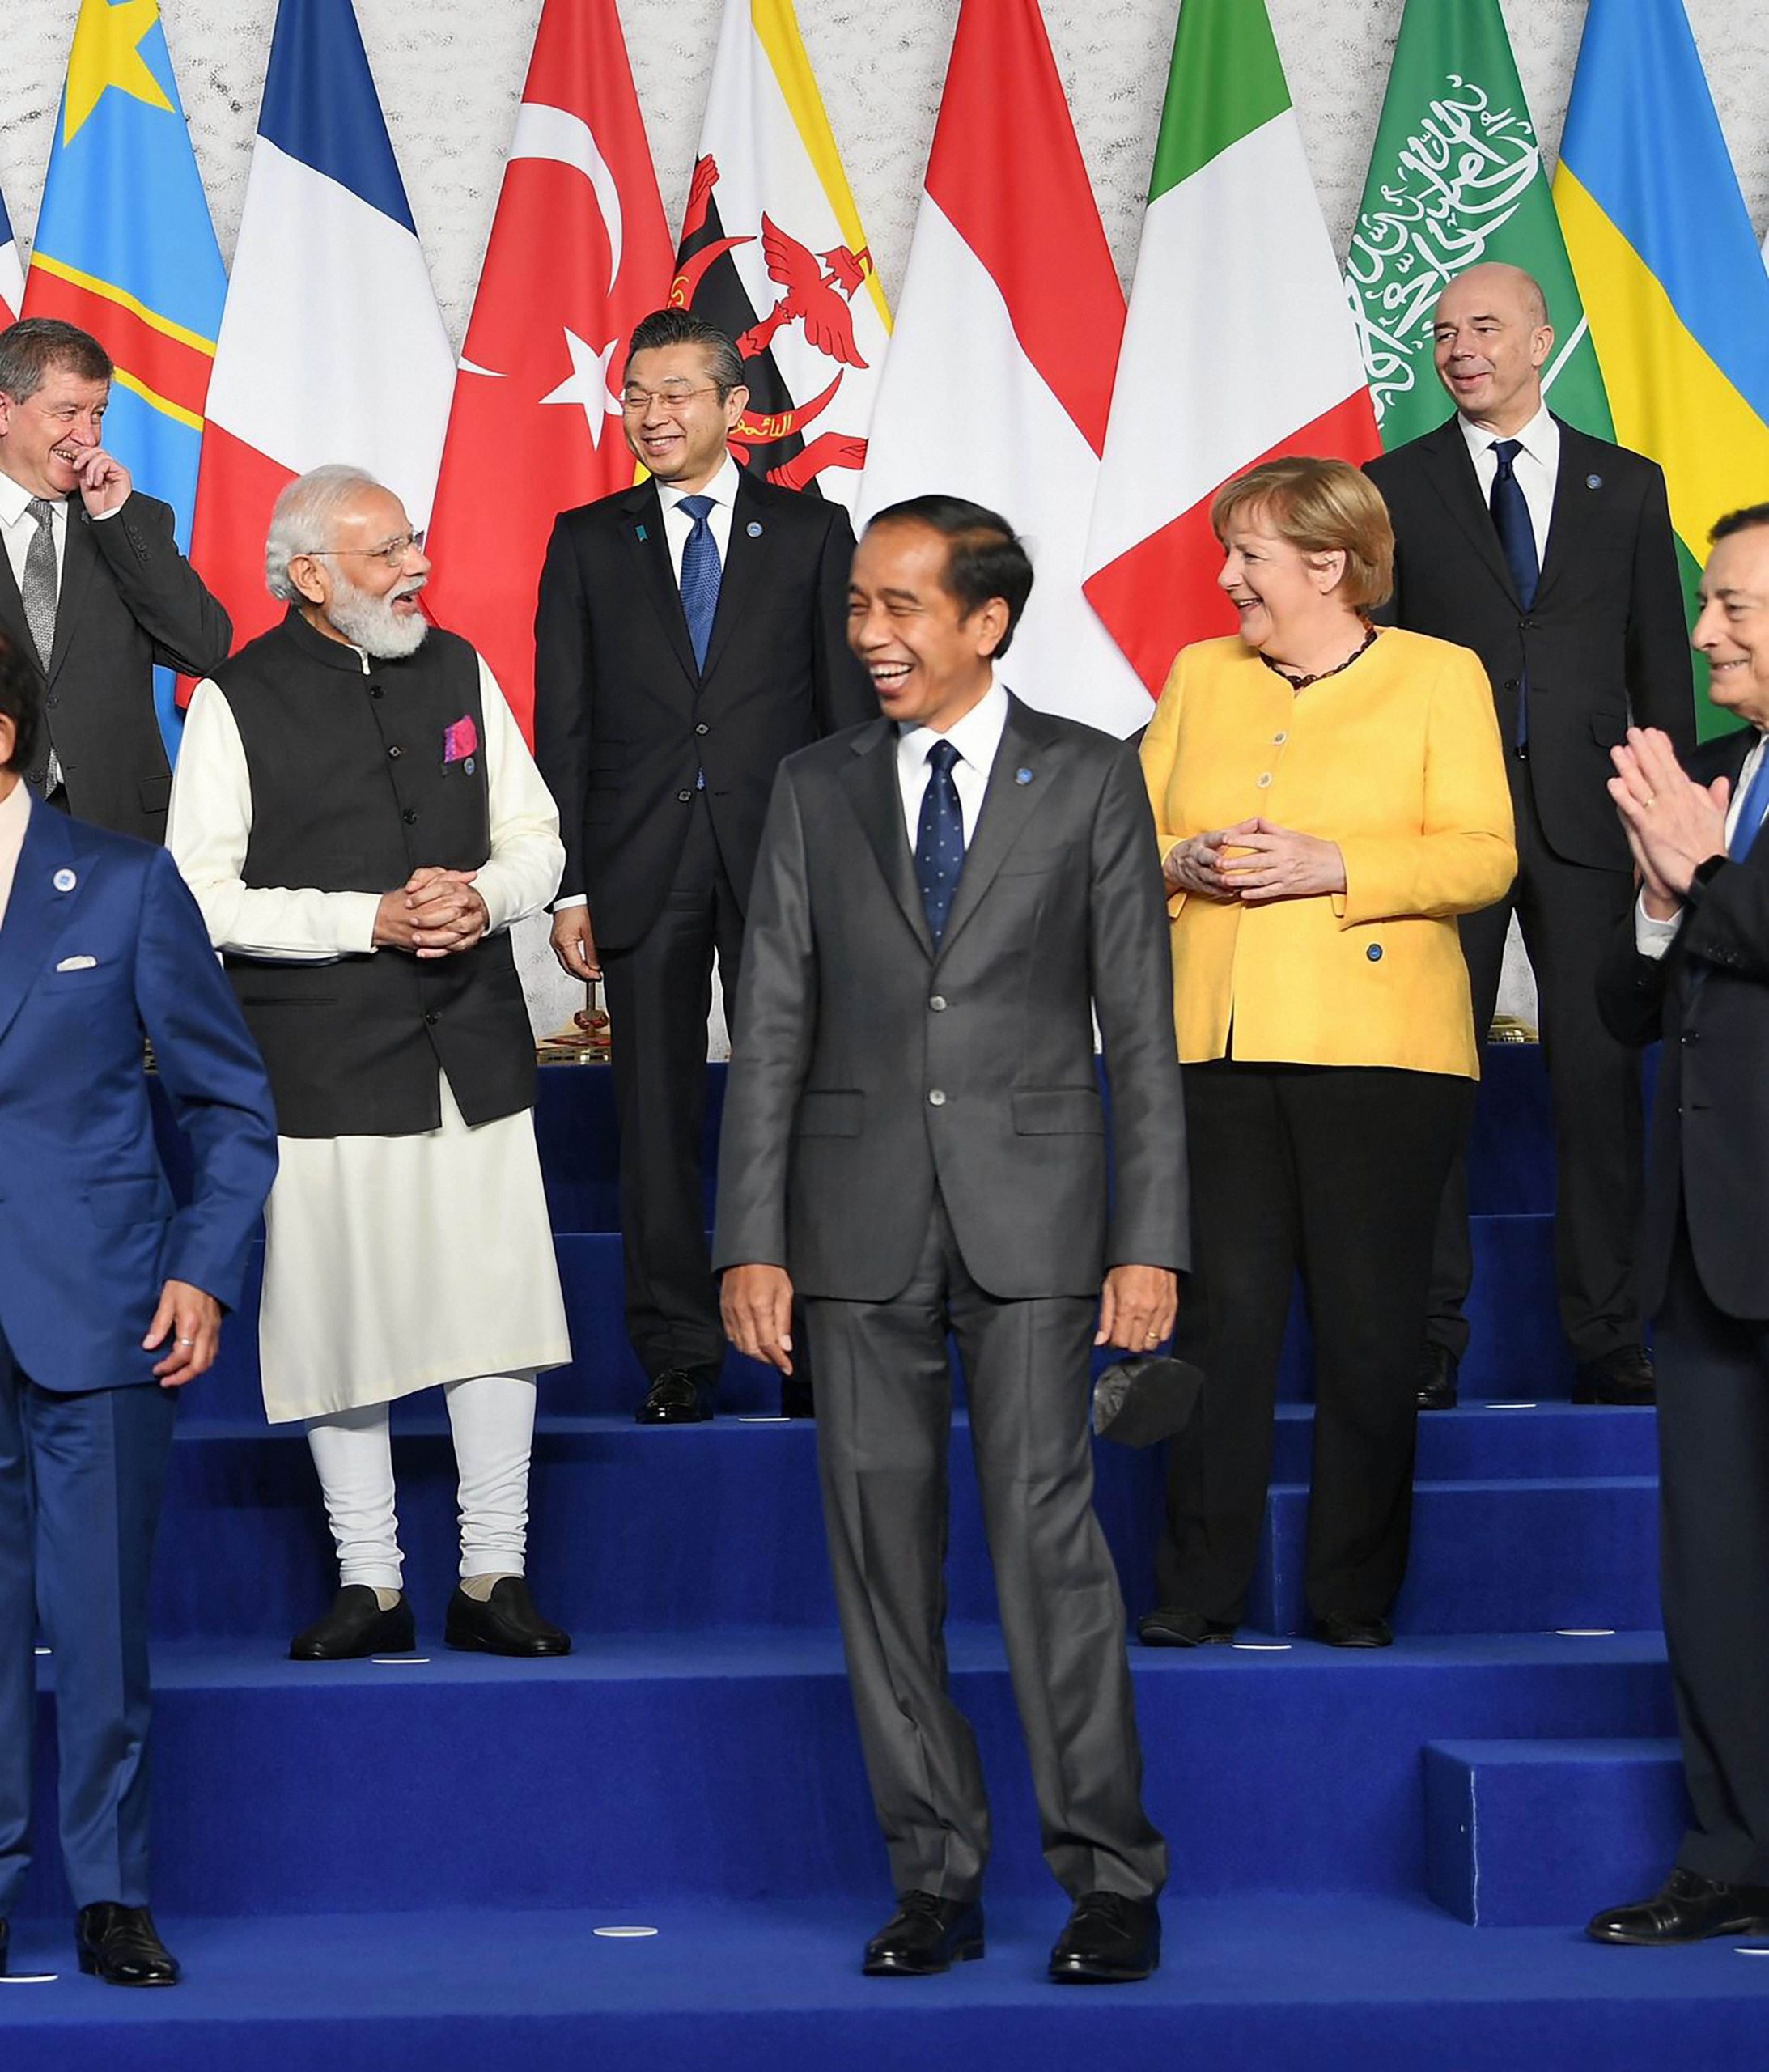 PM Modi to conclude G20 summit today, Glasgow conference next on schedule